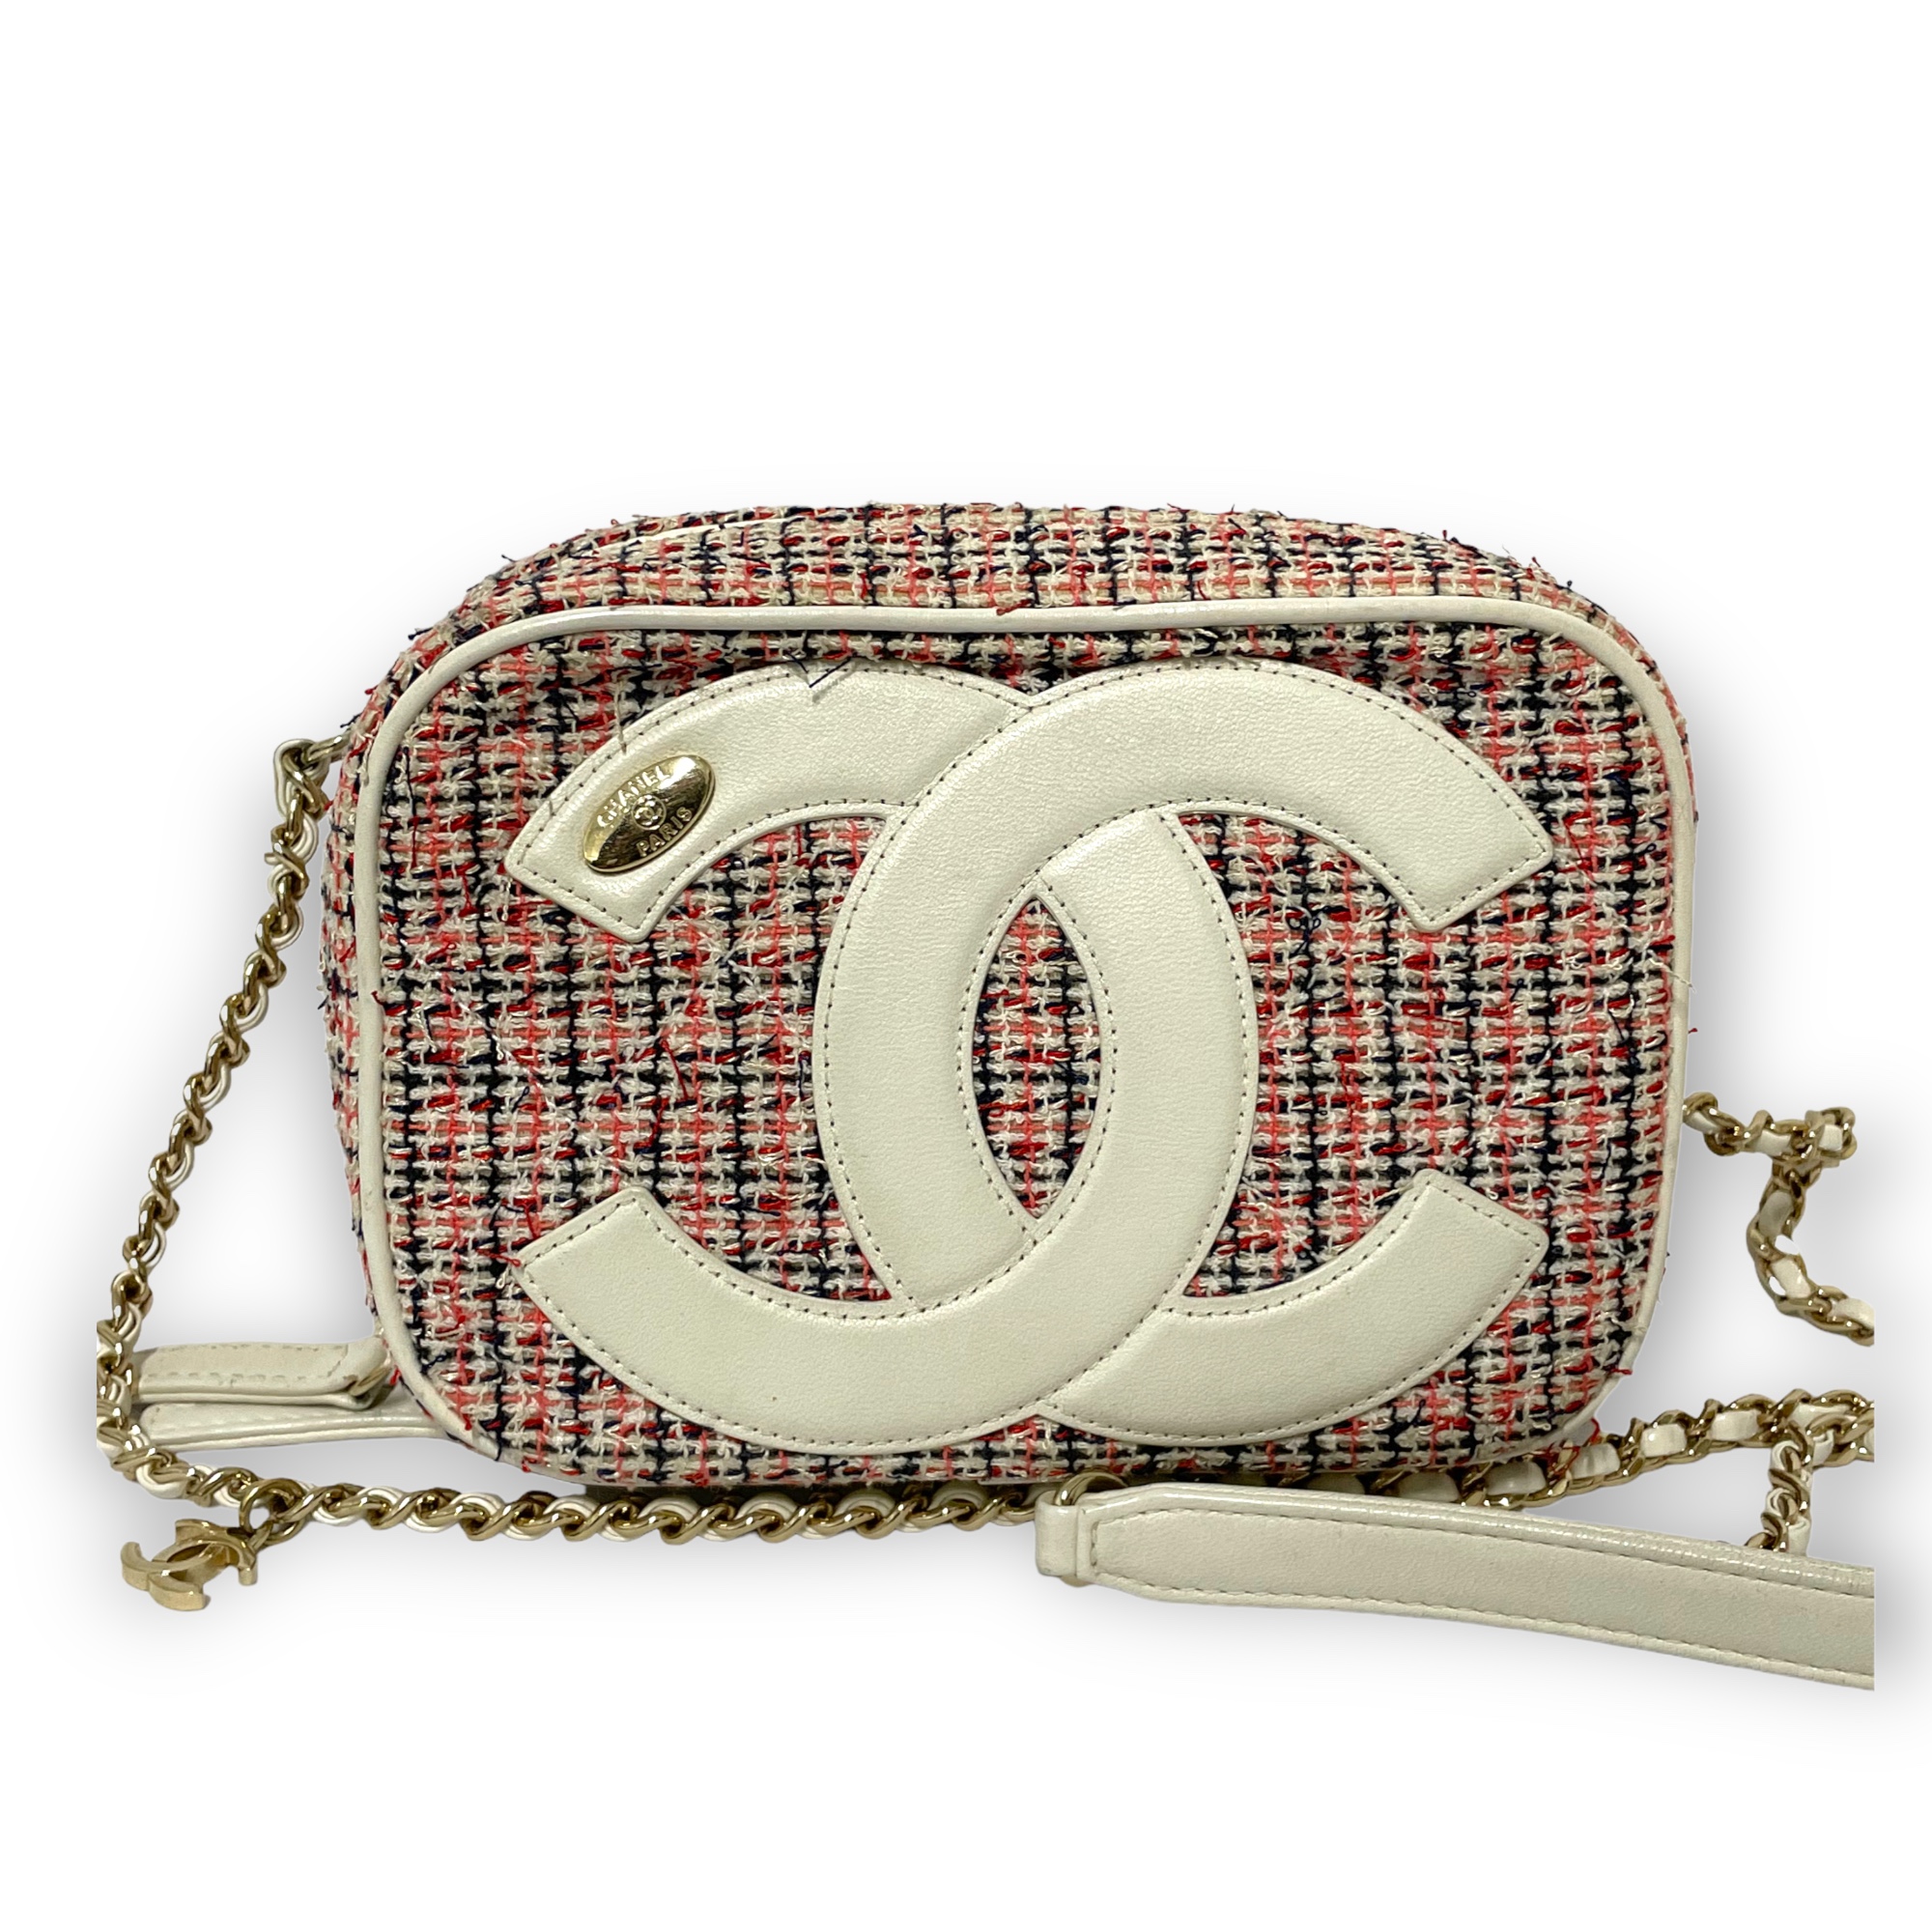 Chanel Handbag Prices Have Gone Up by 60 Since 2019 Aiming for Hermes  Status  Bloomberg